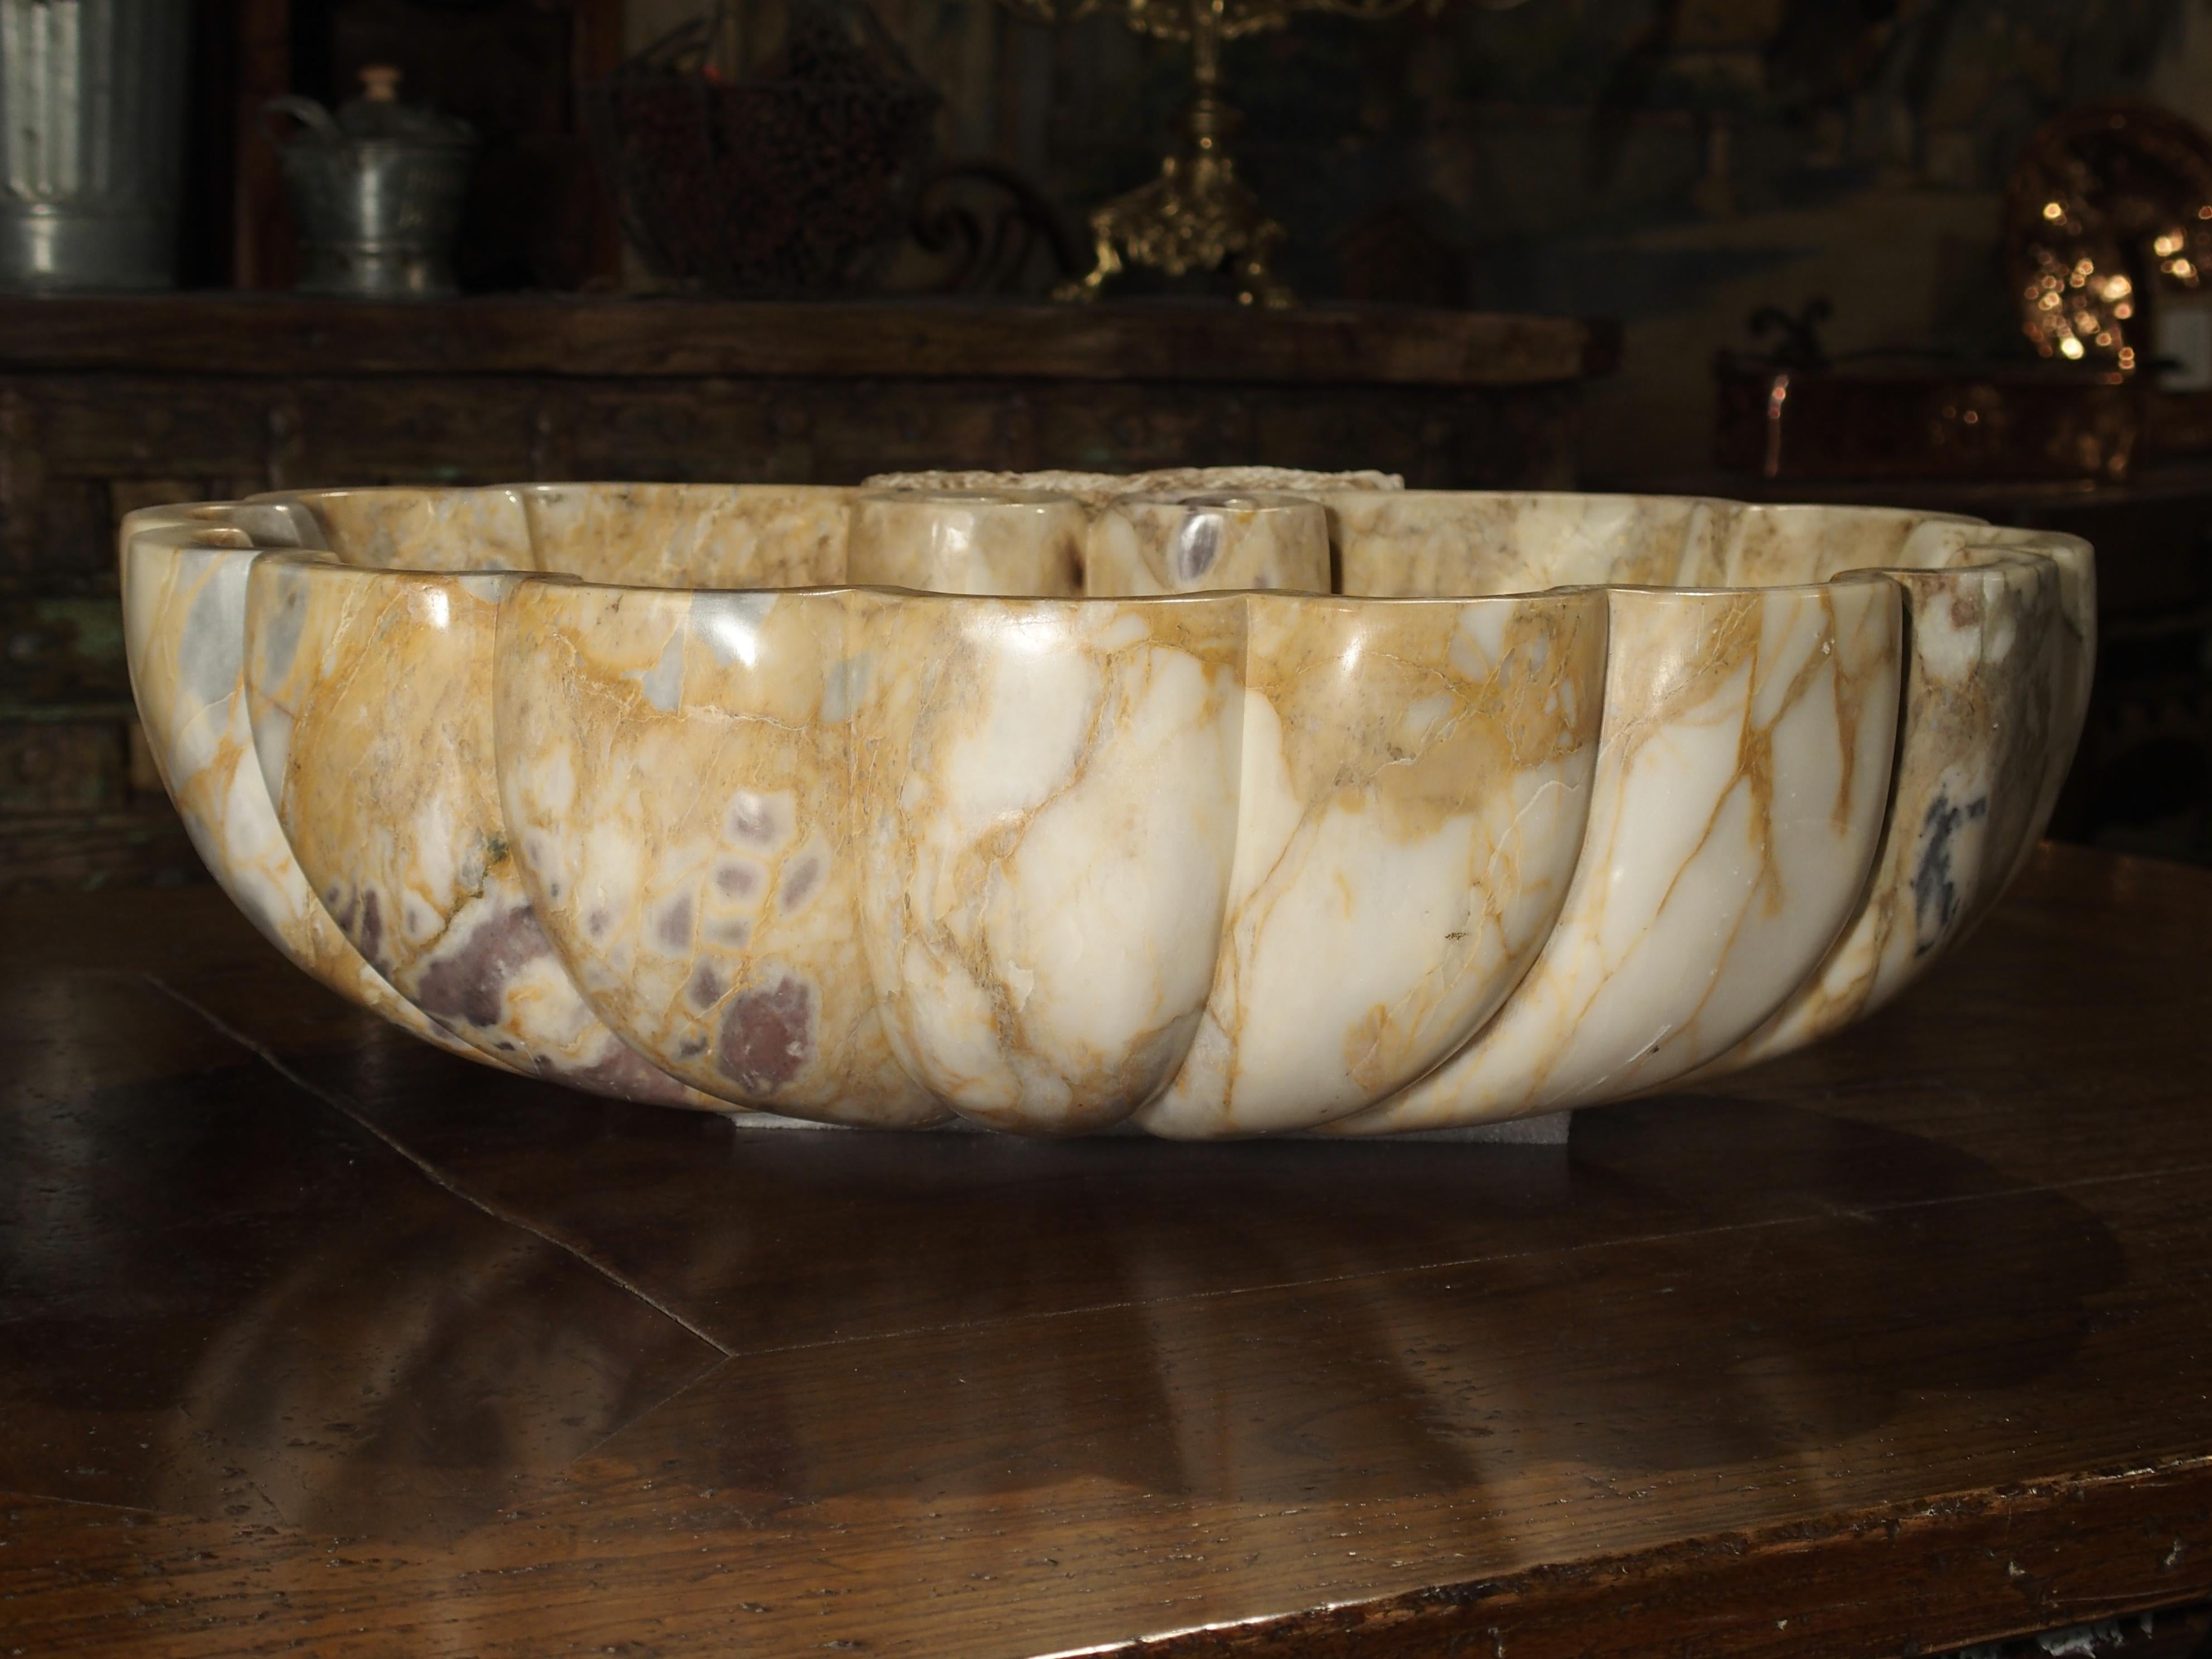 This elegant shell form Breccia marble sink will bring beauty to any surface it is placed upon. The colors of the marble are ochre, cream, and light grey with veins of chocolate brown and tan. This allows it to go with practically any color scheme.